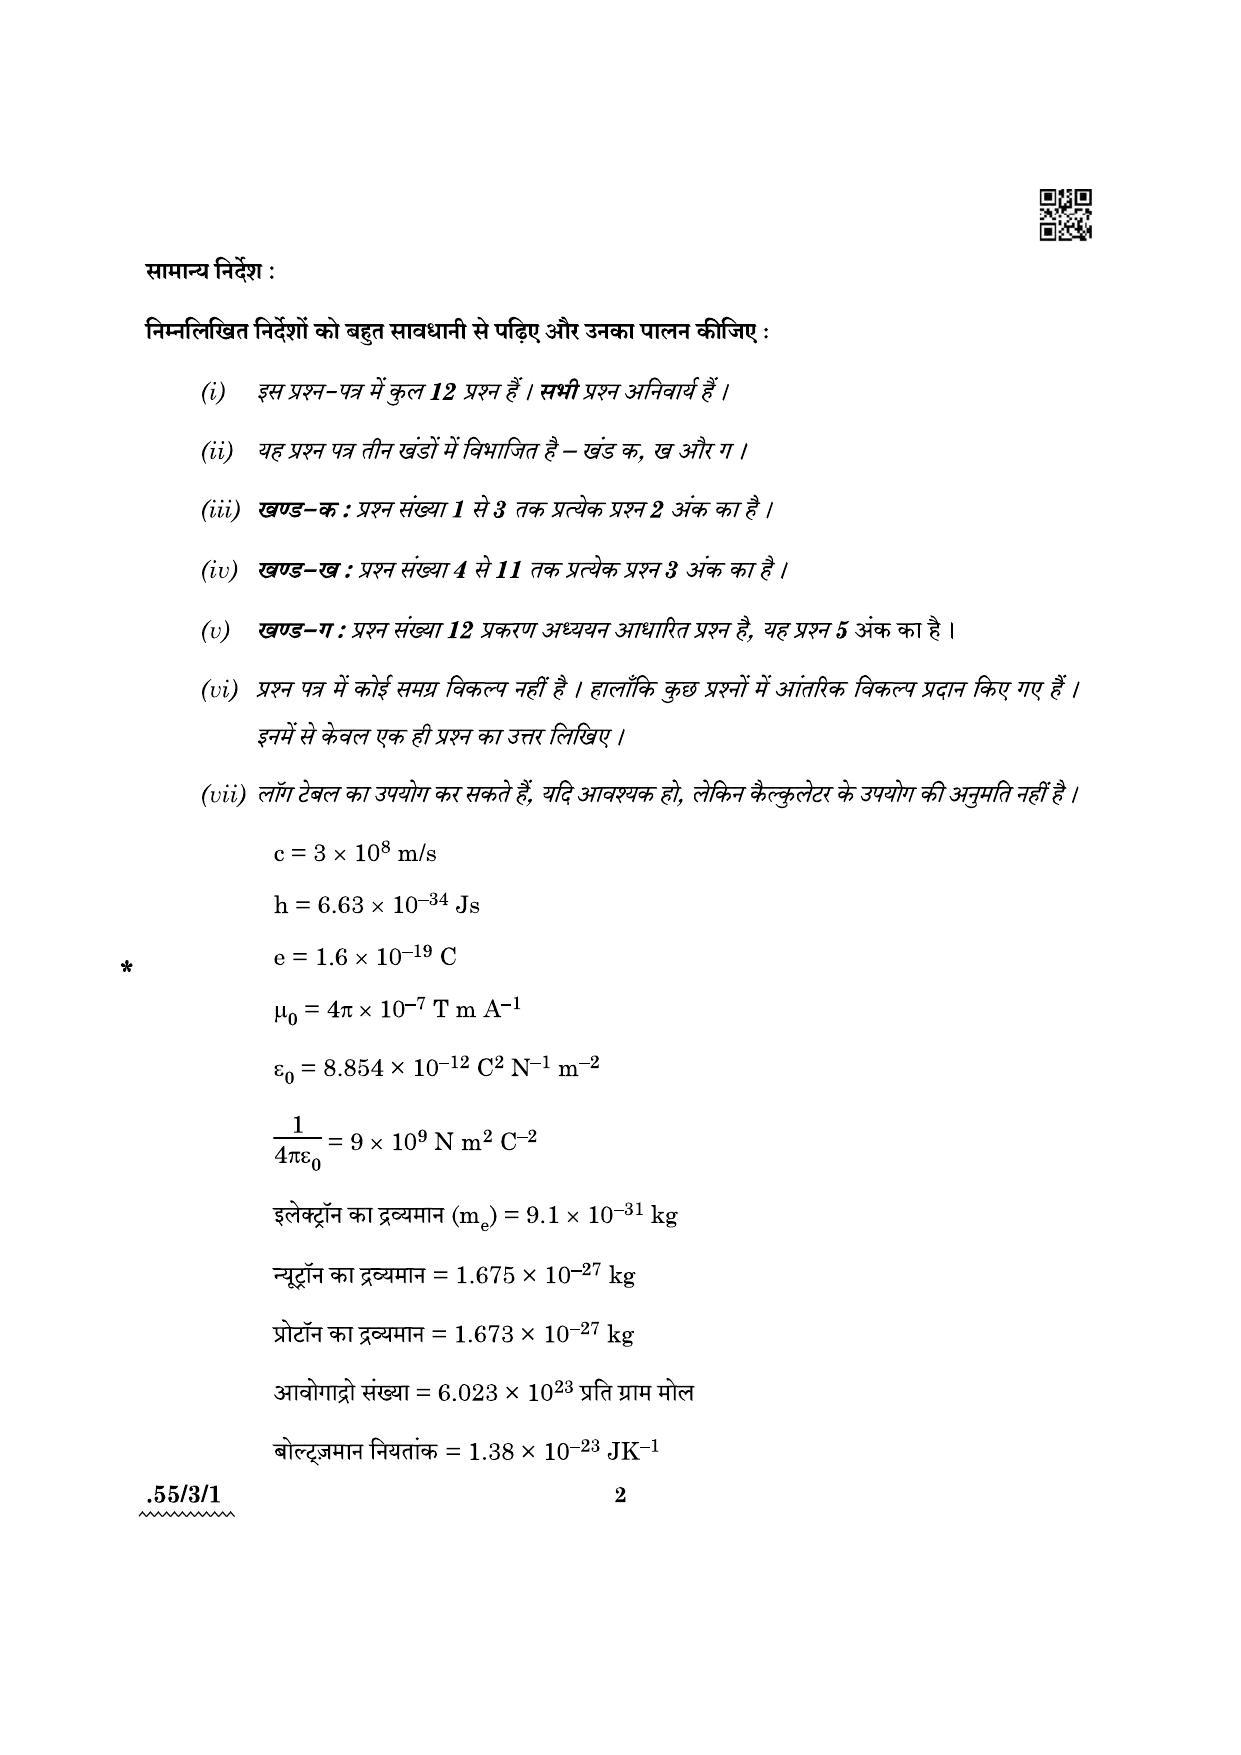 CBSE Class 12 55-3-1 Physics 2022 Question Paper - Page 2